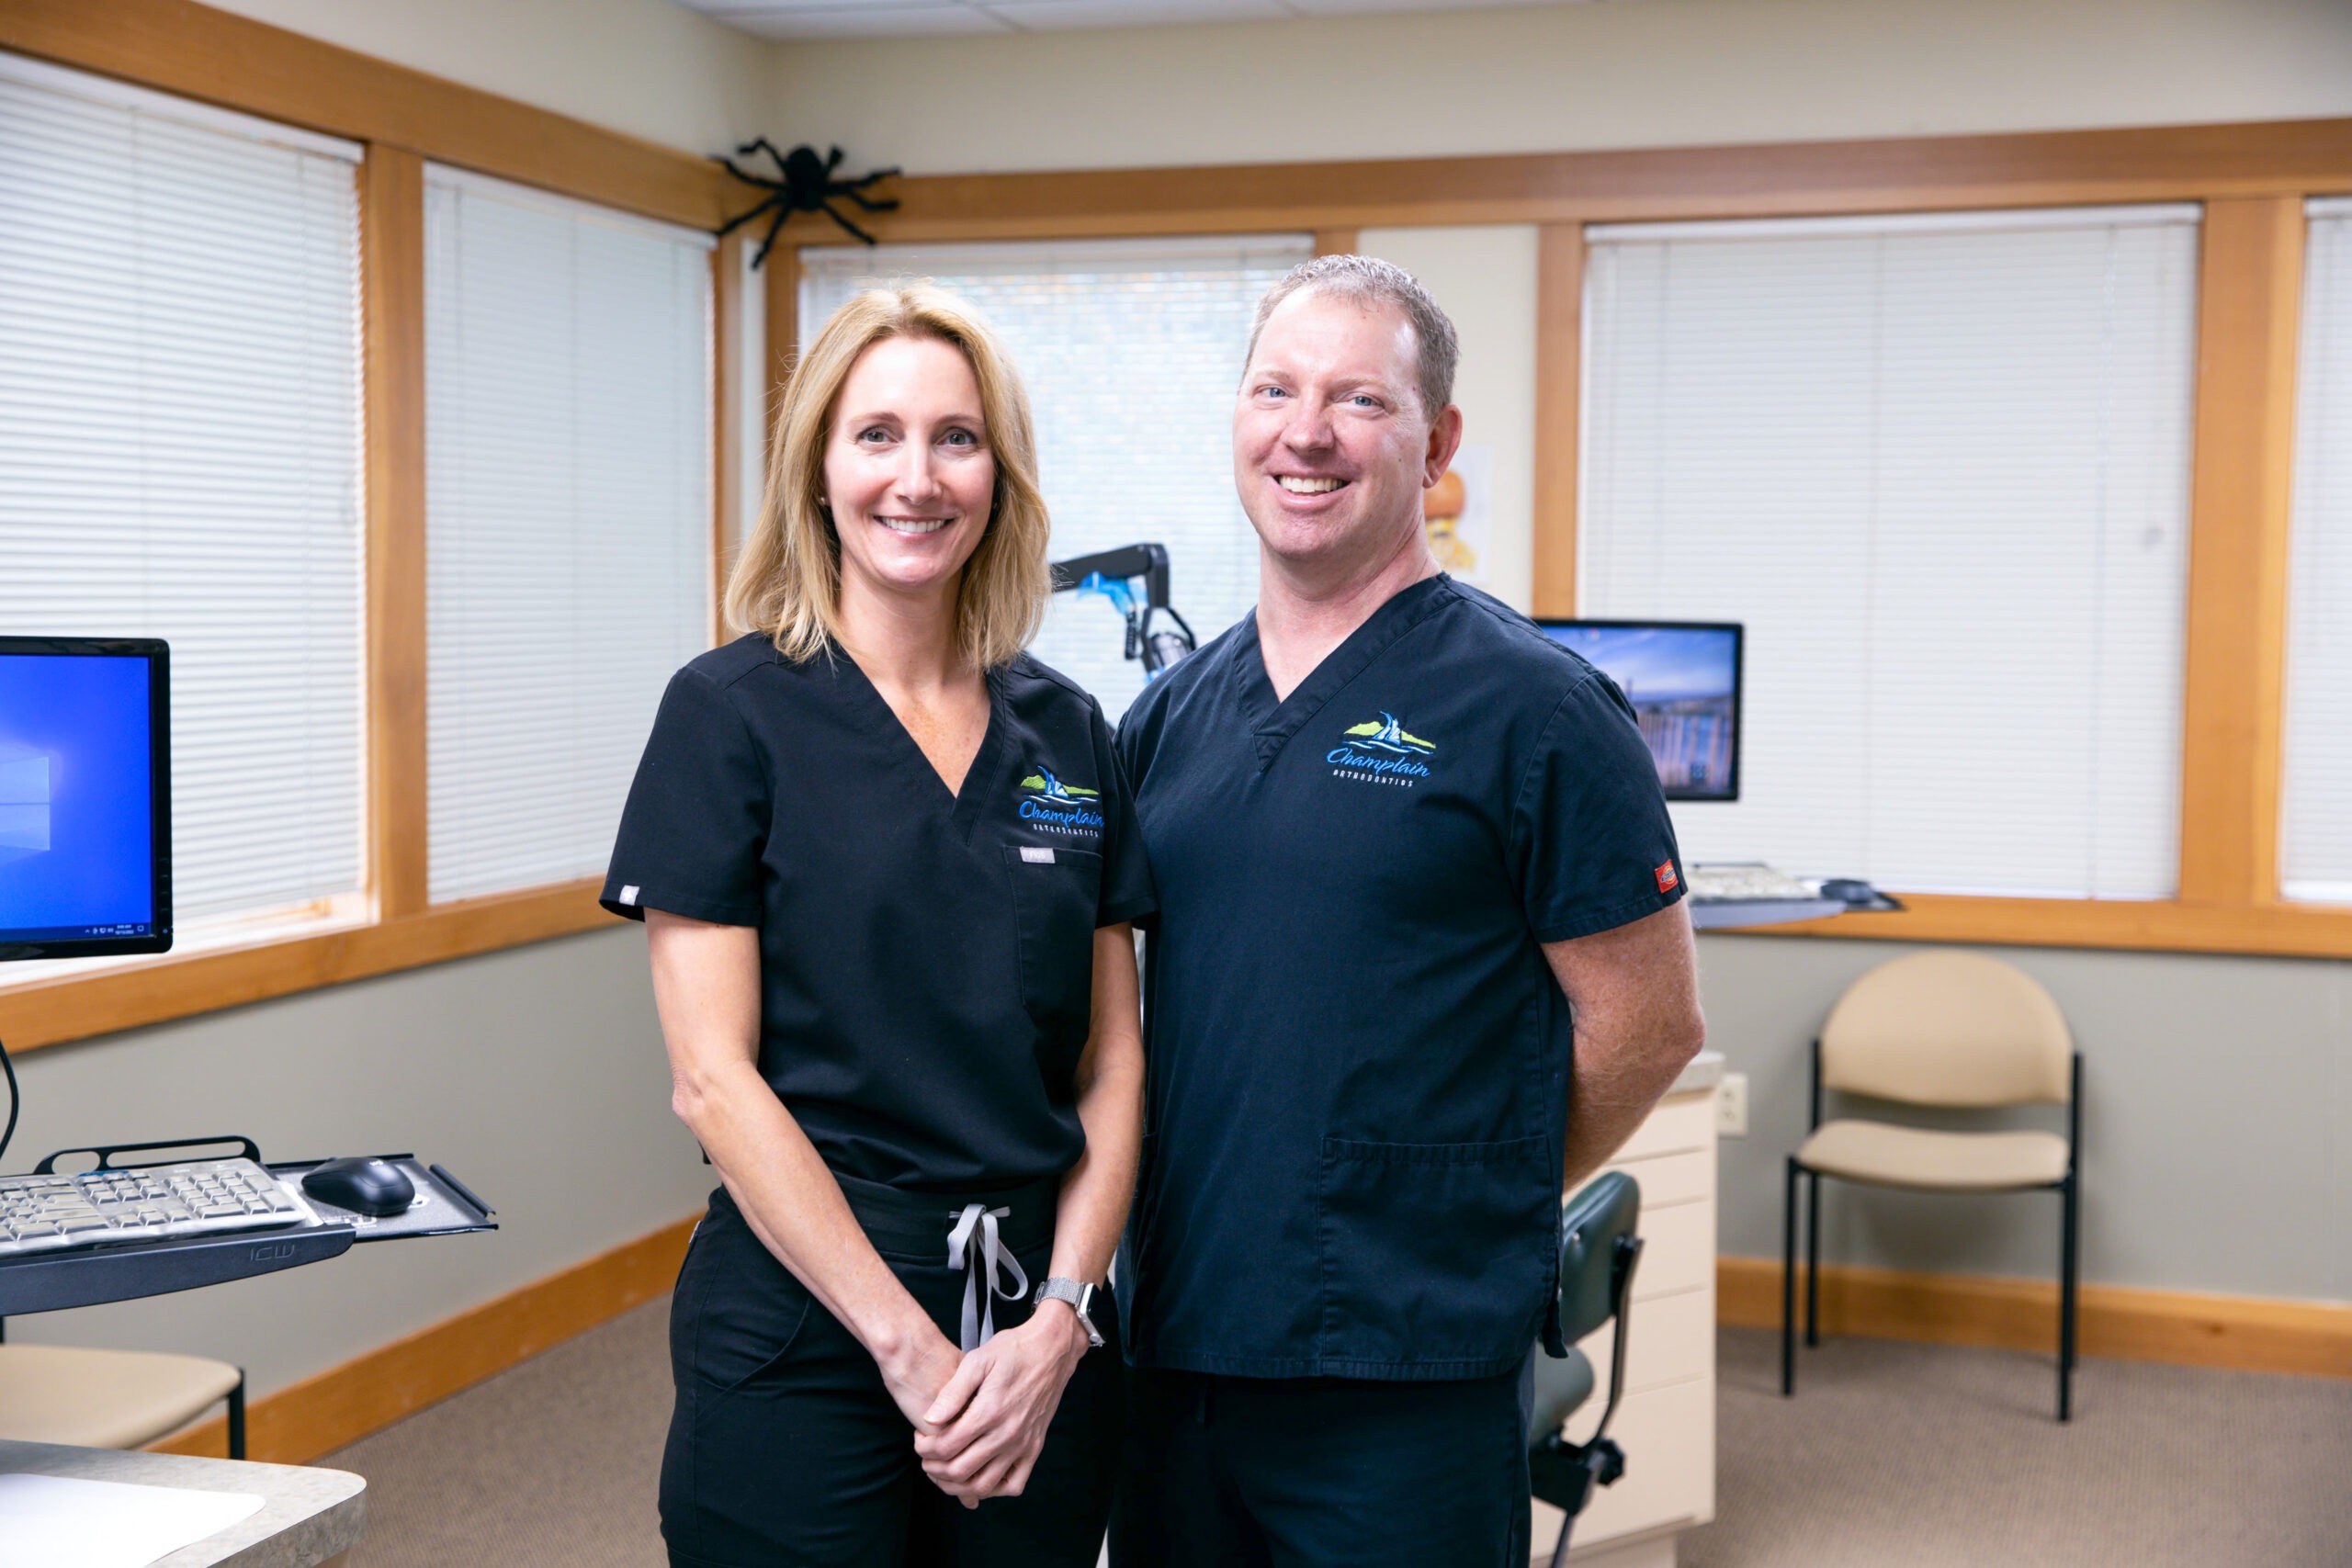 Feeling like you’ve missed the orthodontic treatment window? Champlain Orthodontics answers the question, “When’s the best age to get braces?”